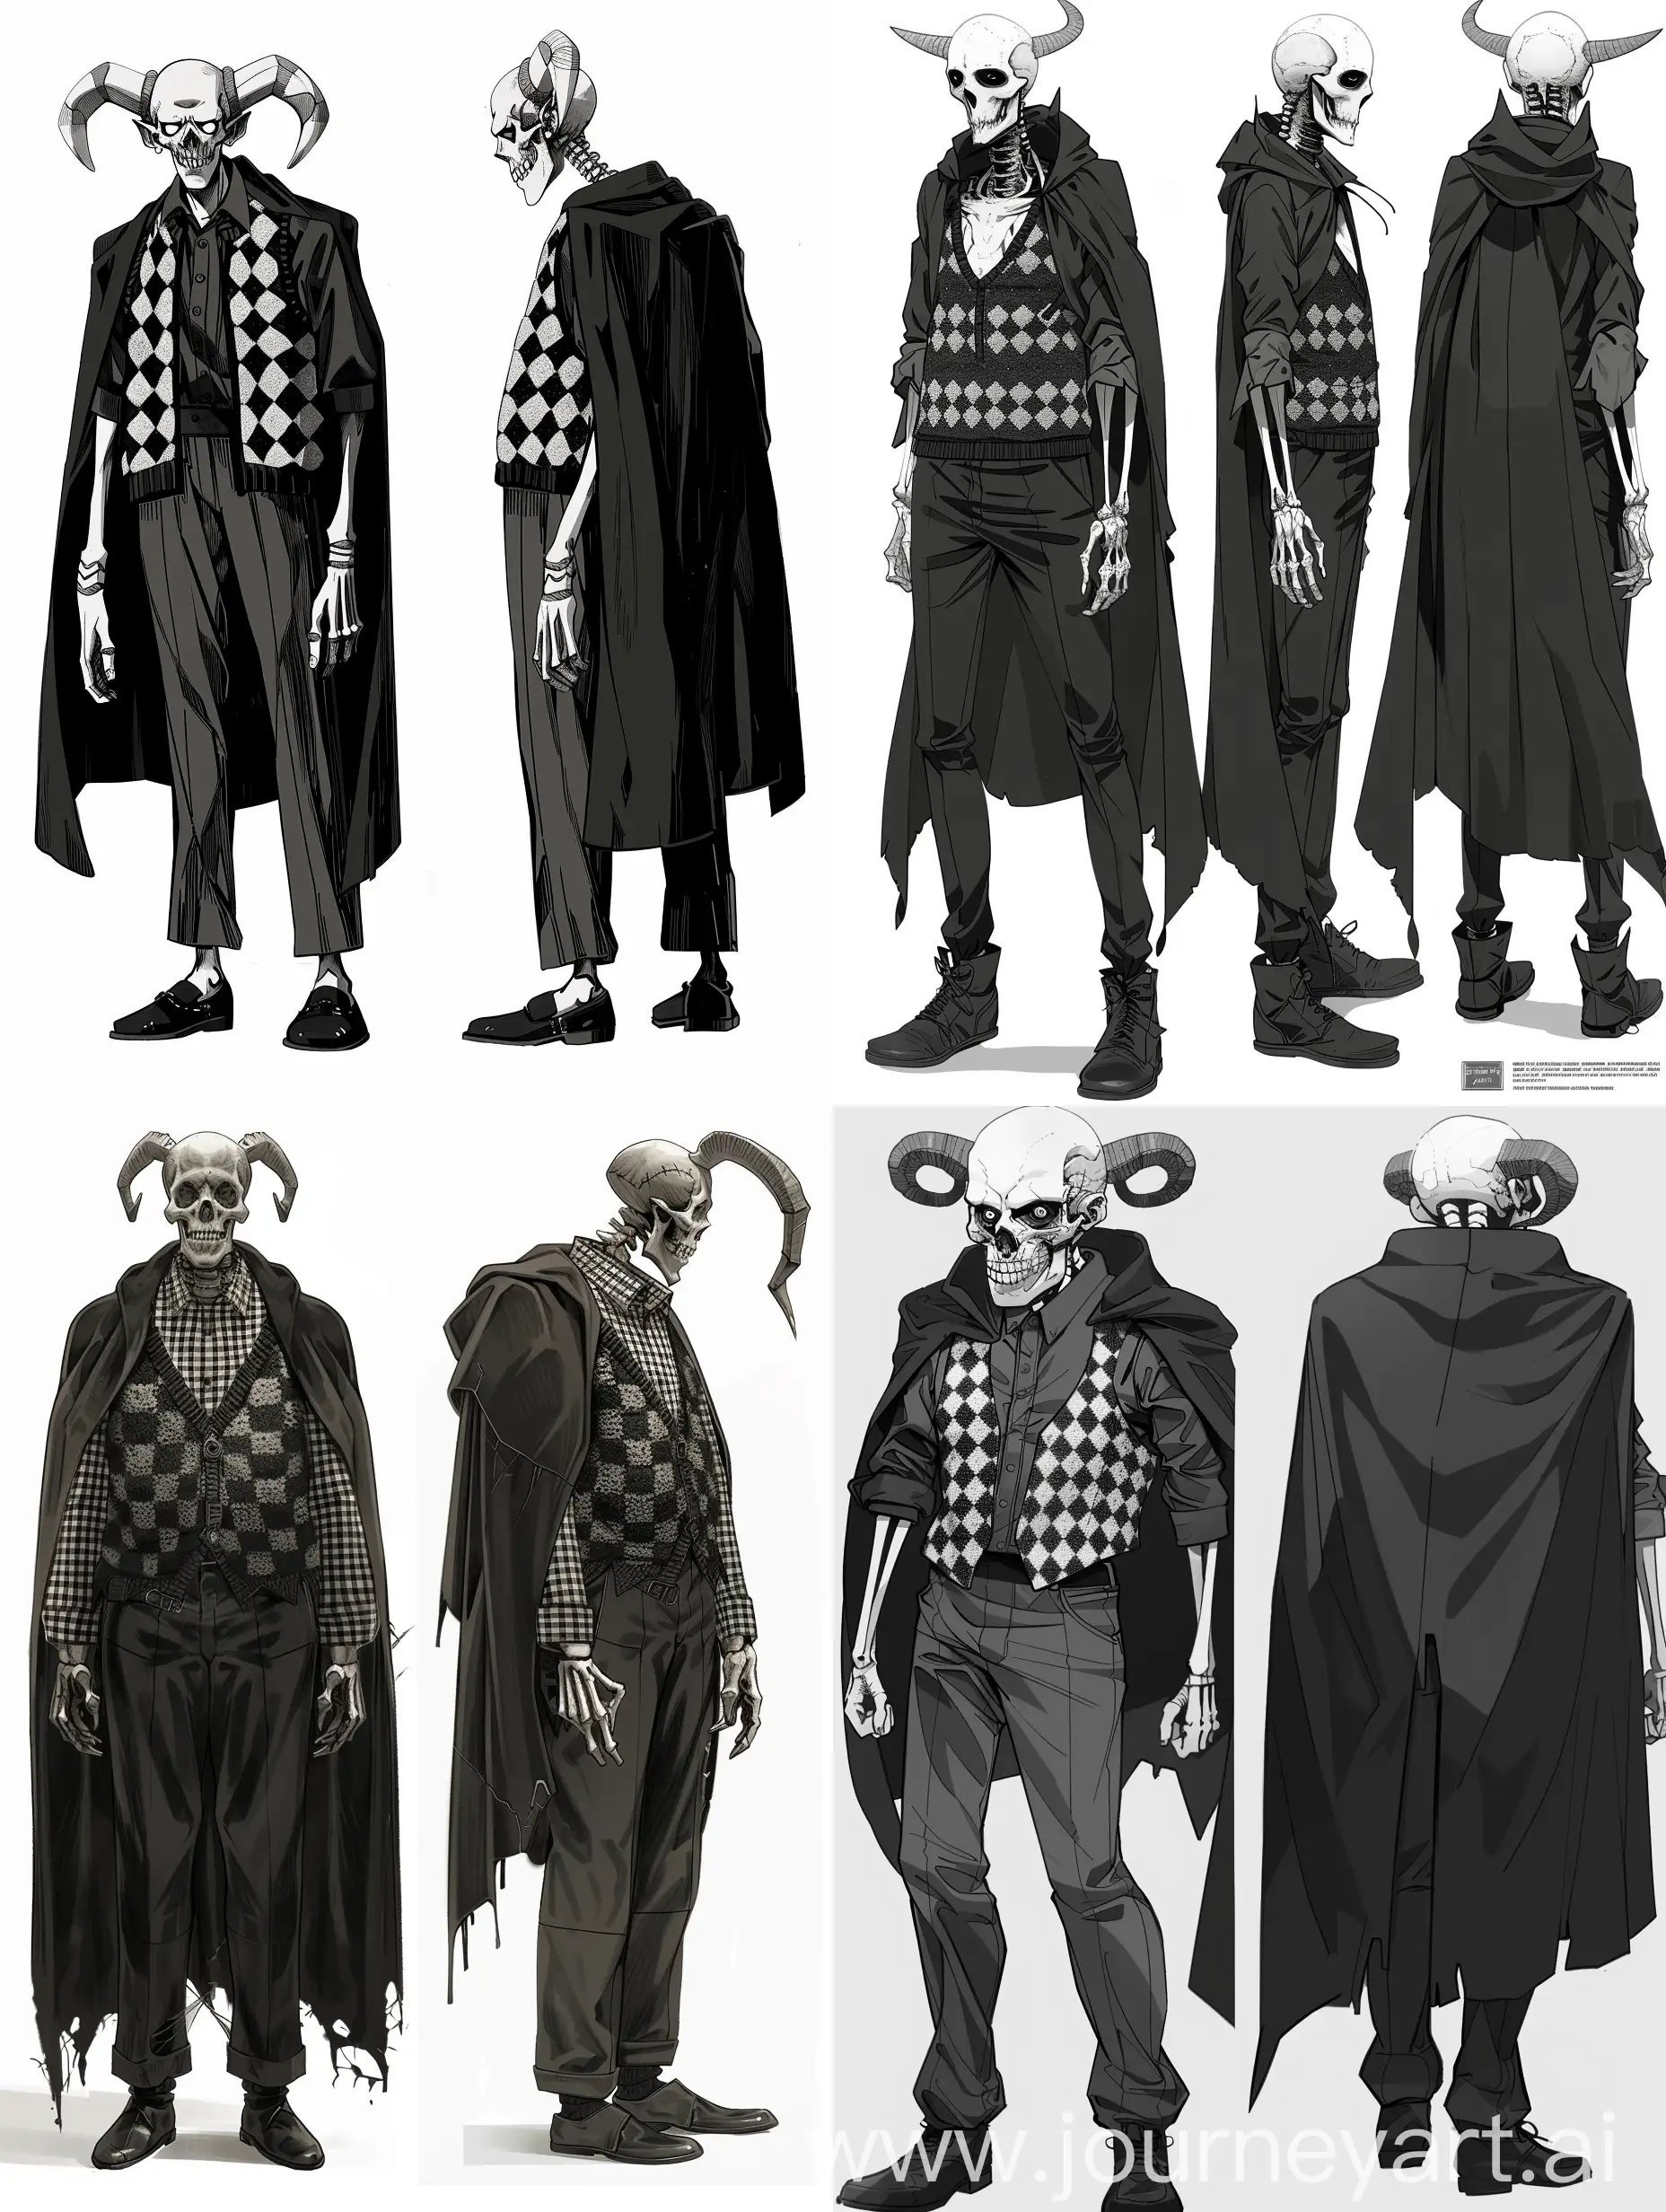 Dark-Anime-Character-with-Skull-Face-and-Knitted-Vest